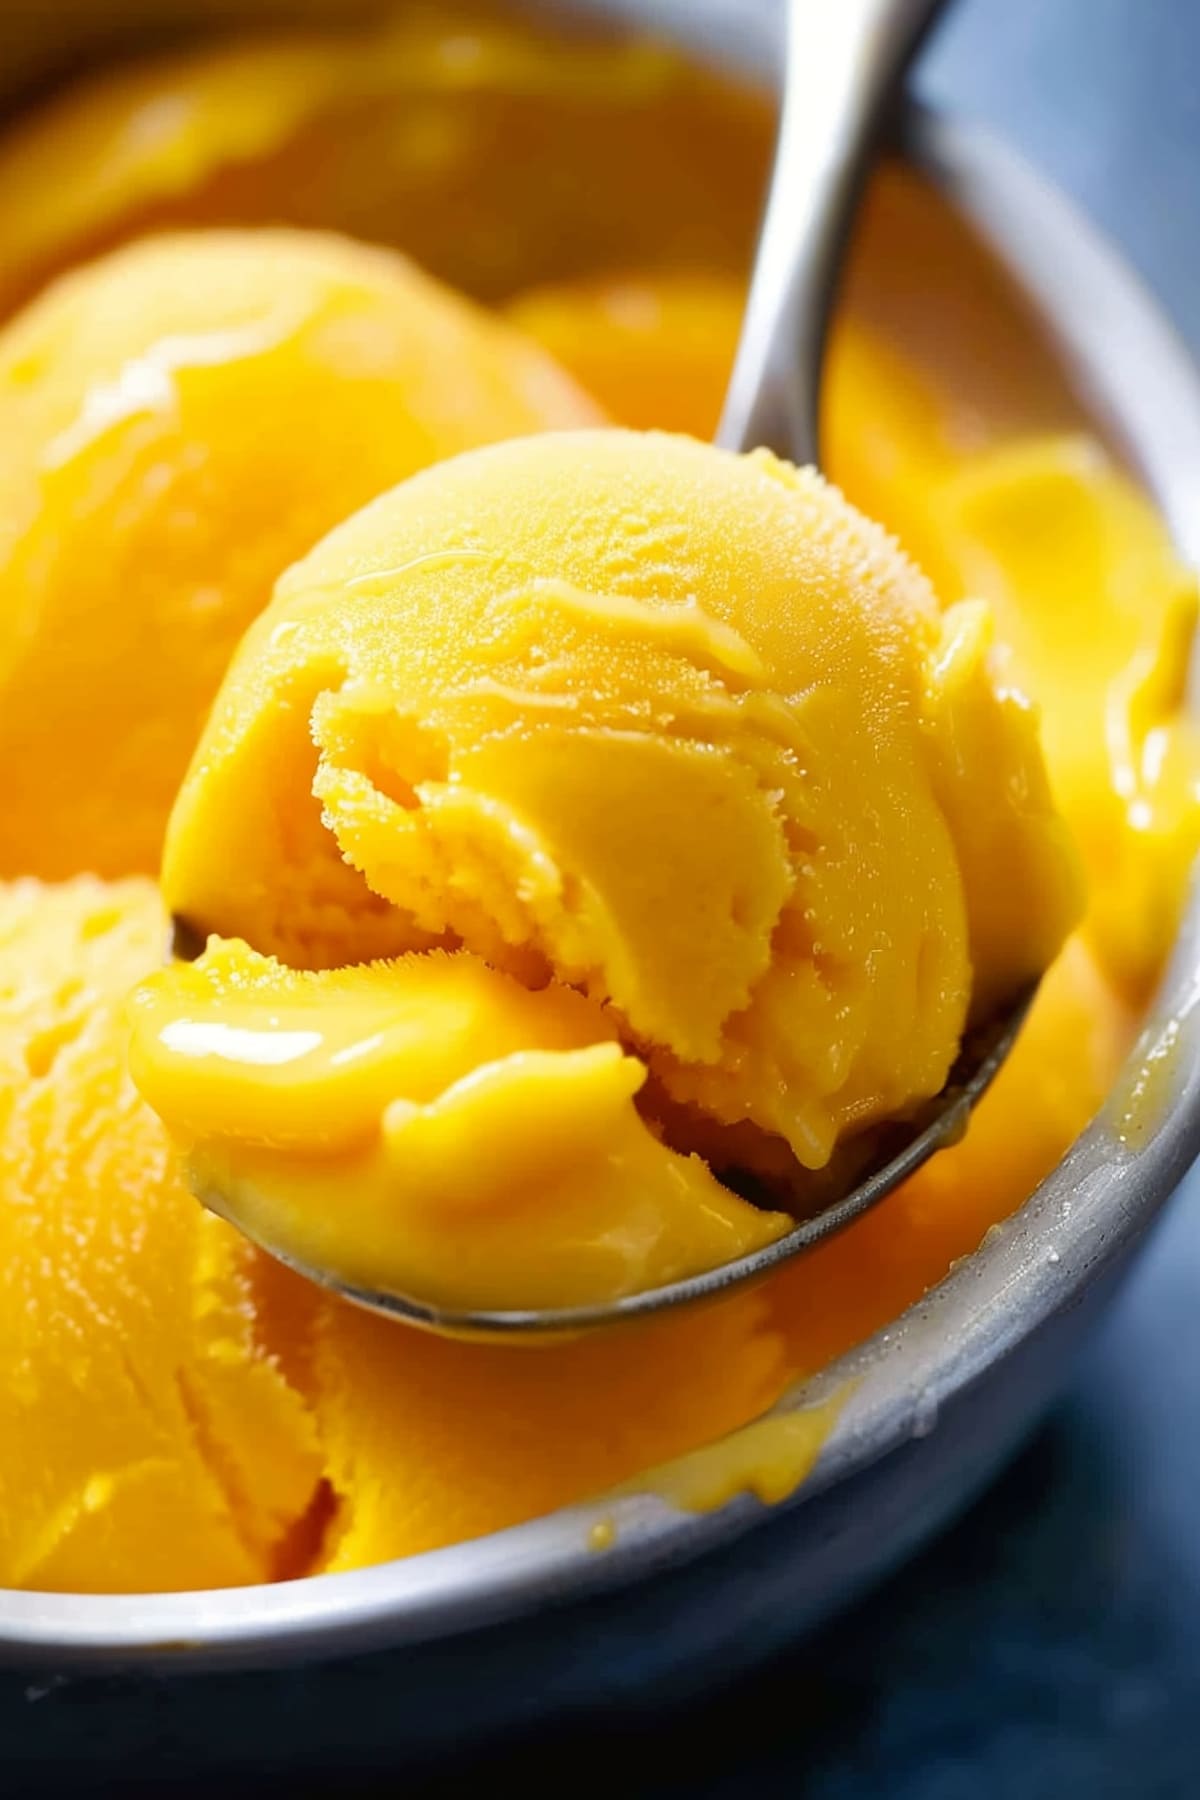 A bowl of mango sorbet with a spoon, close-up shot